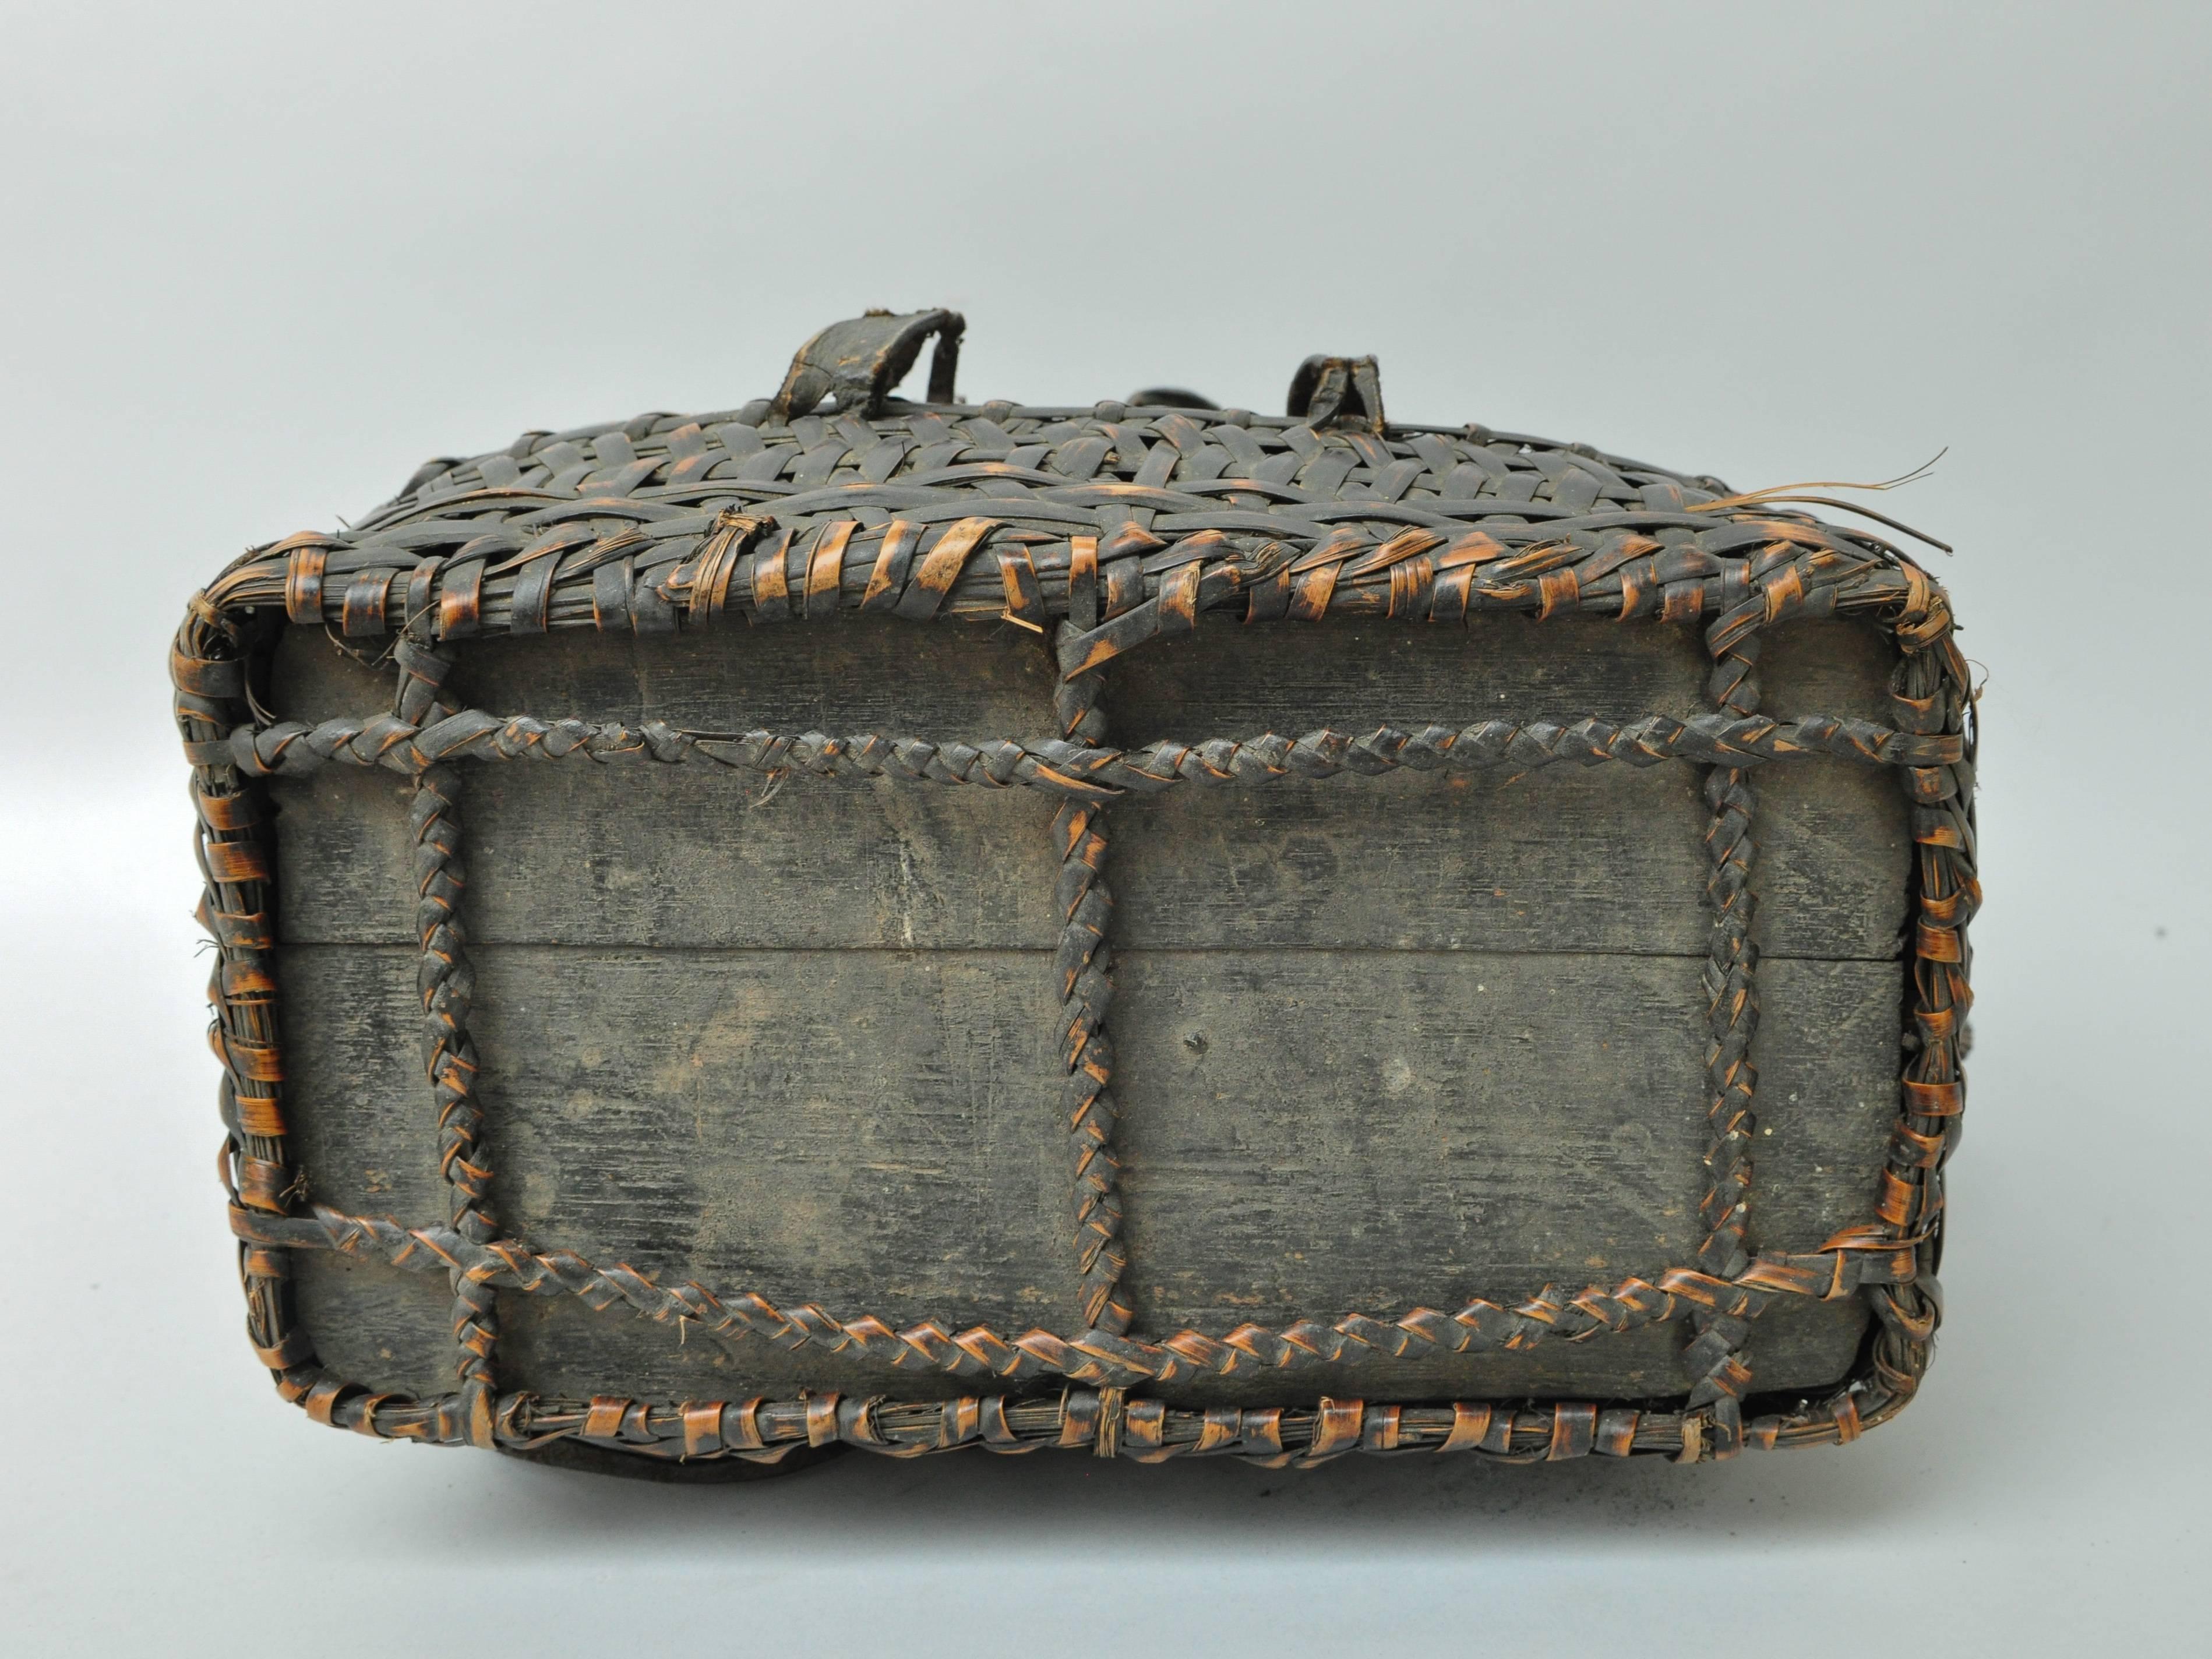 Bamboo Tribal Storage and Carrying Basket with Lid from Bhutan, Mid-Late 20th Century